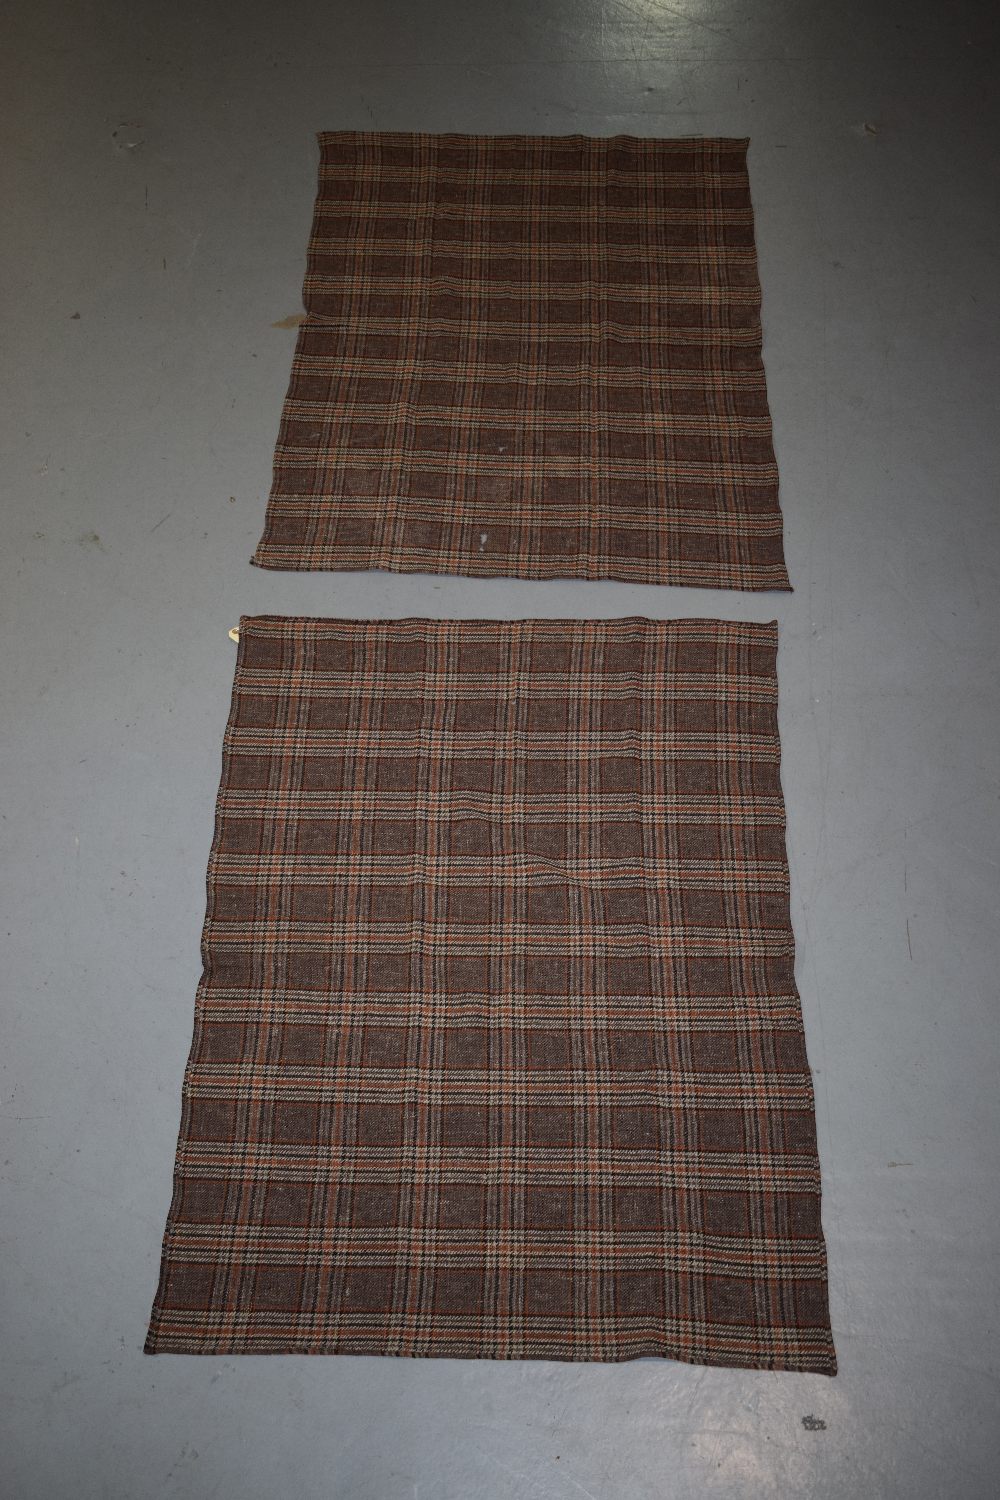 Four wool blankets, probably all English, mid-20th century. All with varying degrees of damage and